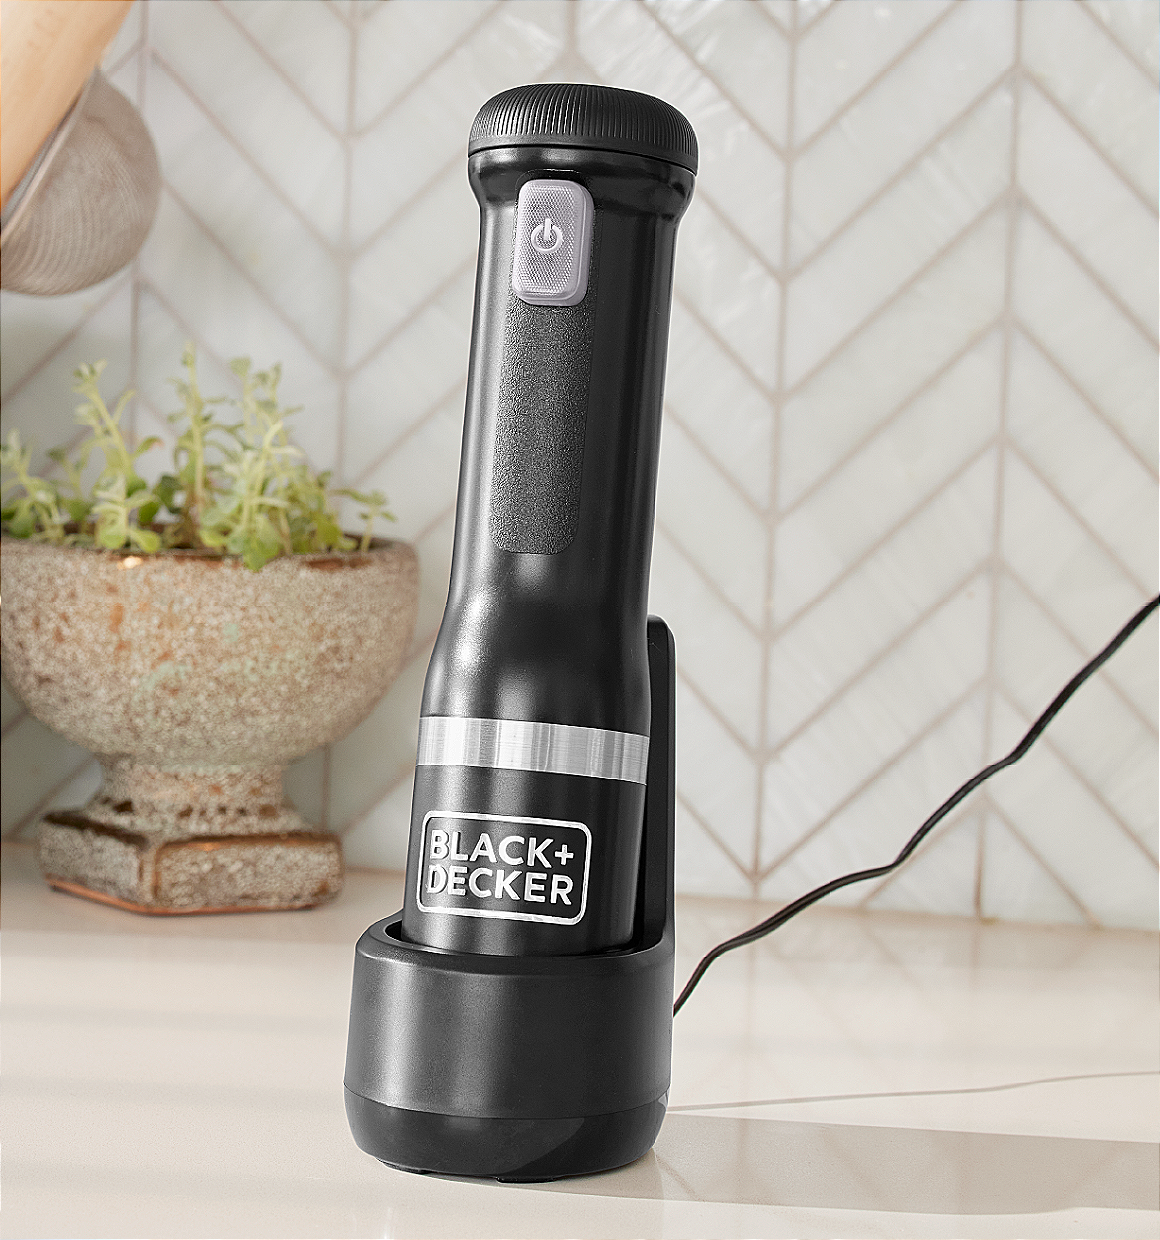 BLACK+DECKER Kitchen Wand Cordless Immersion Blender, 3 in 1 Multi Tool  Set, Hand Blender with Charging Dock, Whisk, and Chopper, Red (BCKM1013K06)